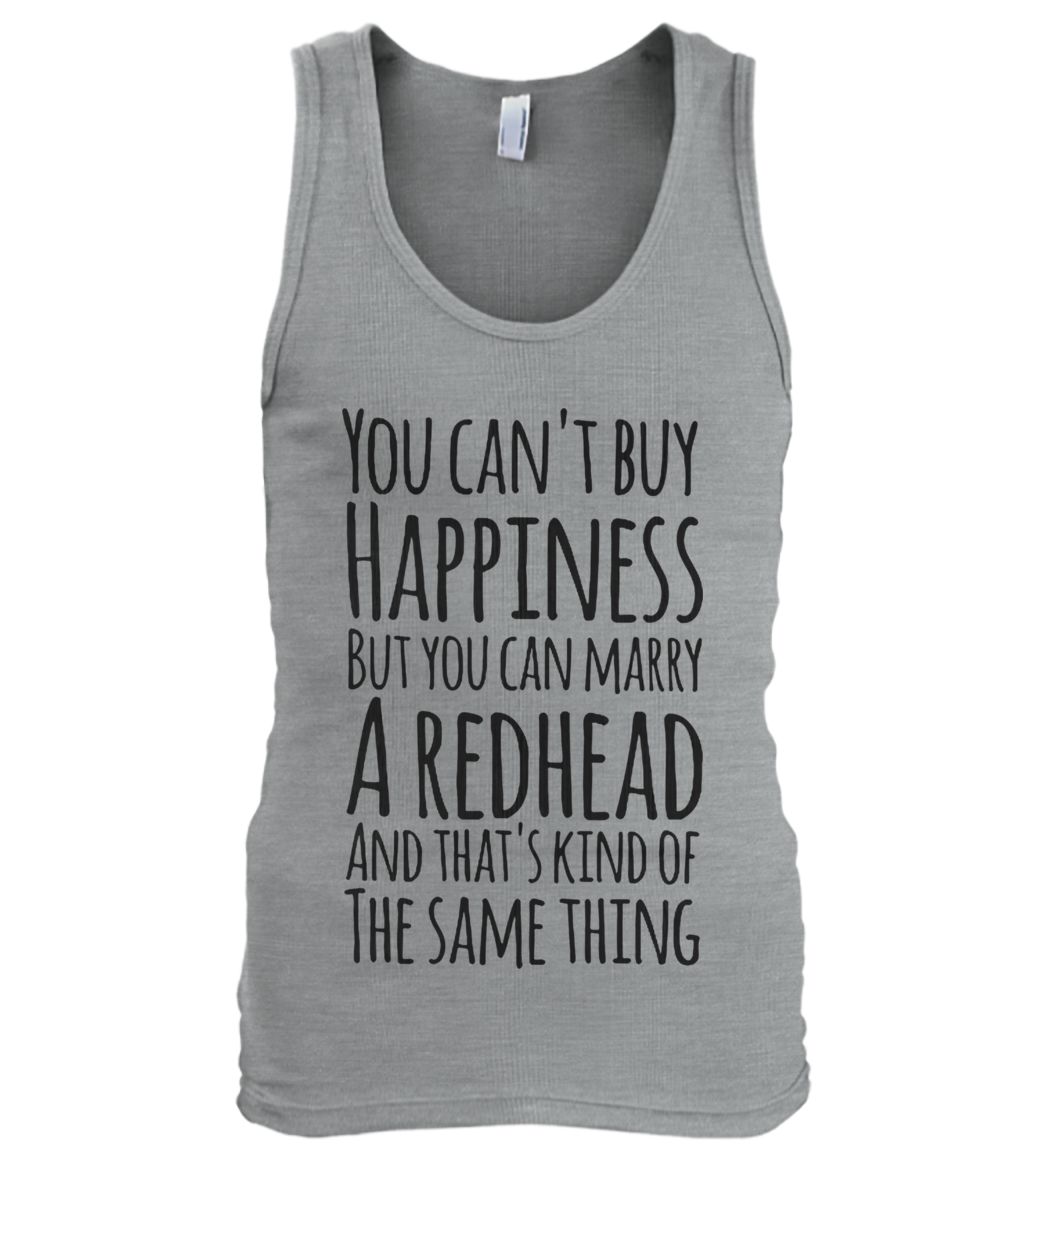 You can’t buy happiness but you can marry a redhead and that’s kind of the same thing men's tank top